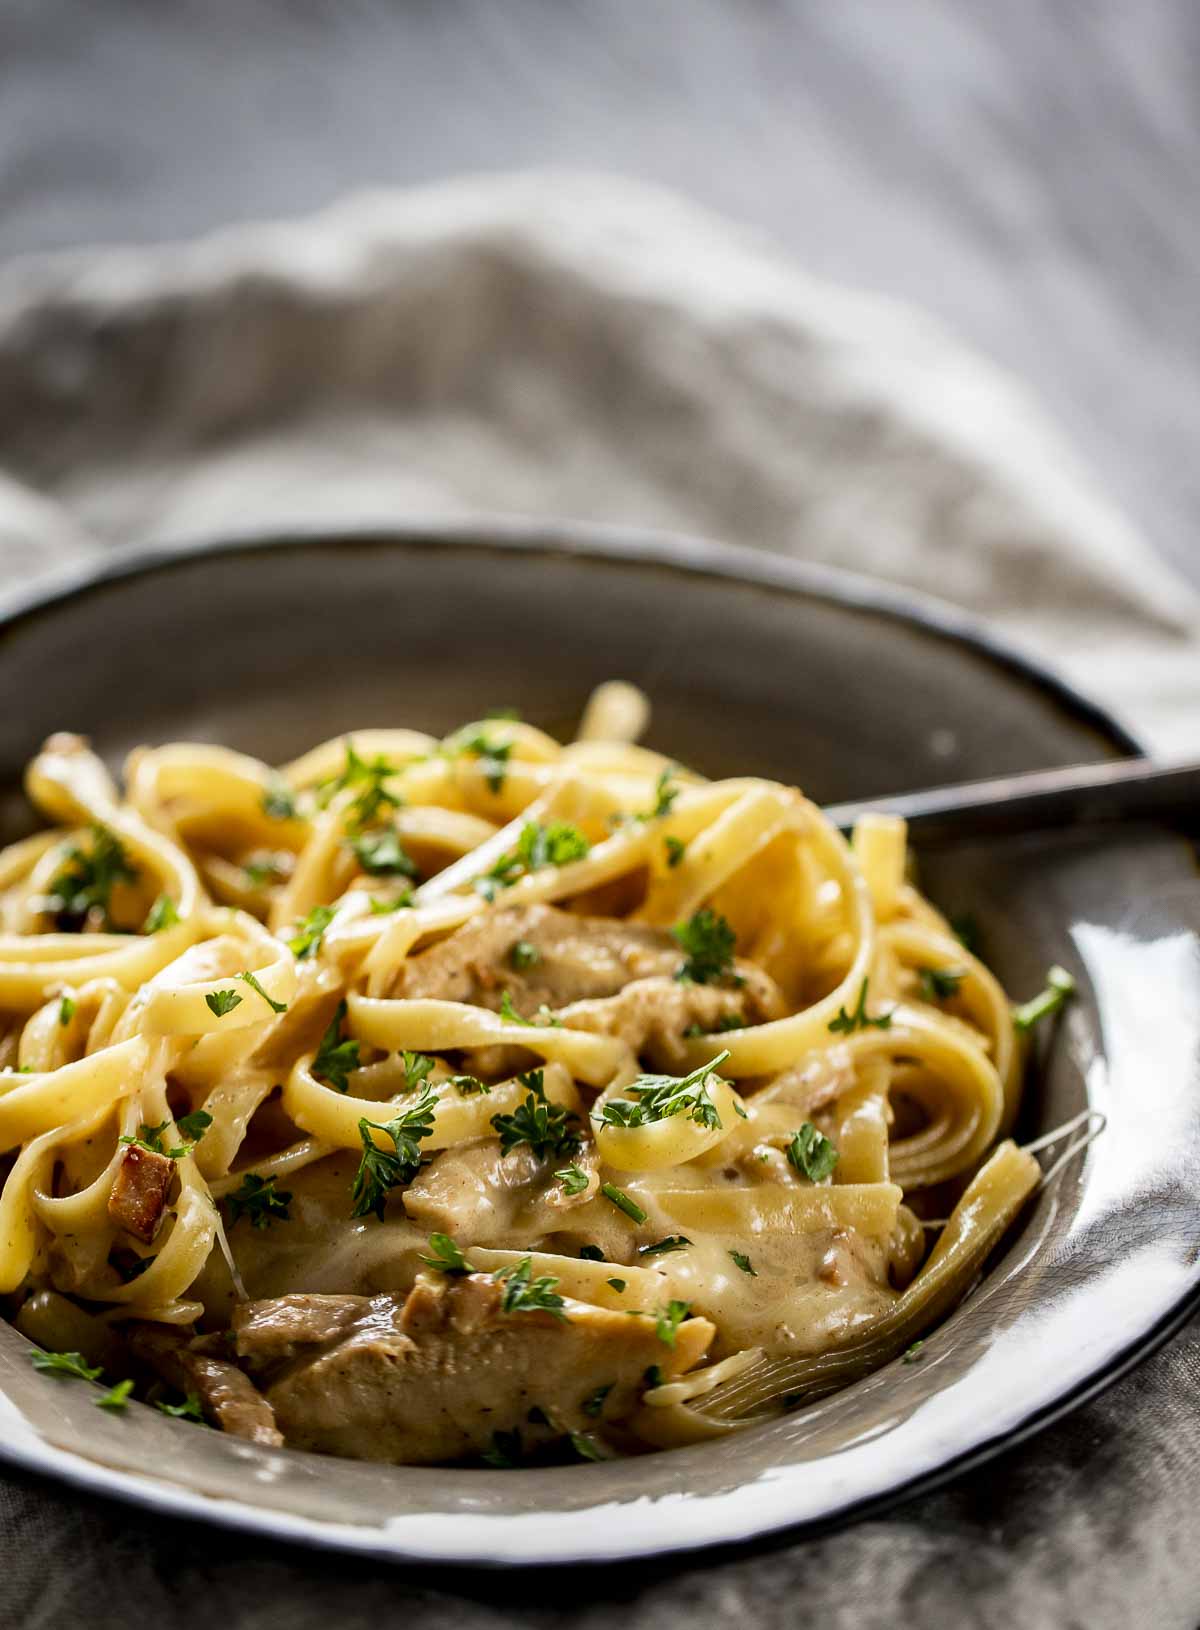 side view of a bowl of pasta in a creamy white sauce with chicken garnished with parsley